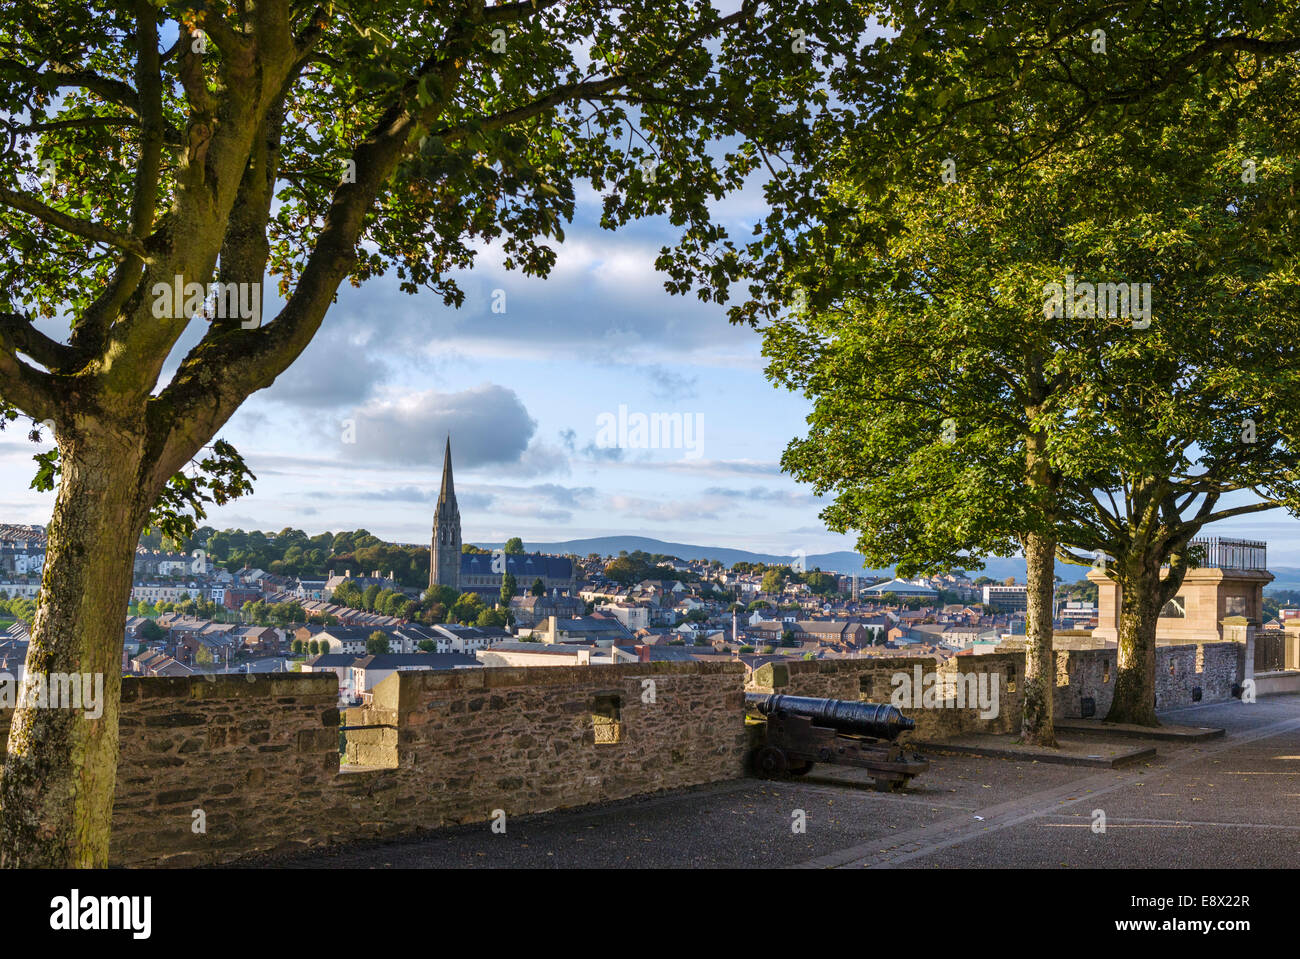 Old city walls in the early evening with St Eugene's Cathedral in the distance, Derry, County Londonderry, Northern Ireland, UK Stock Photo